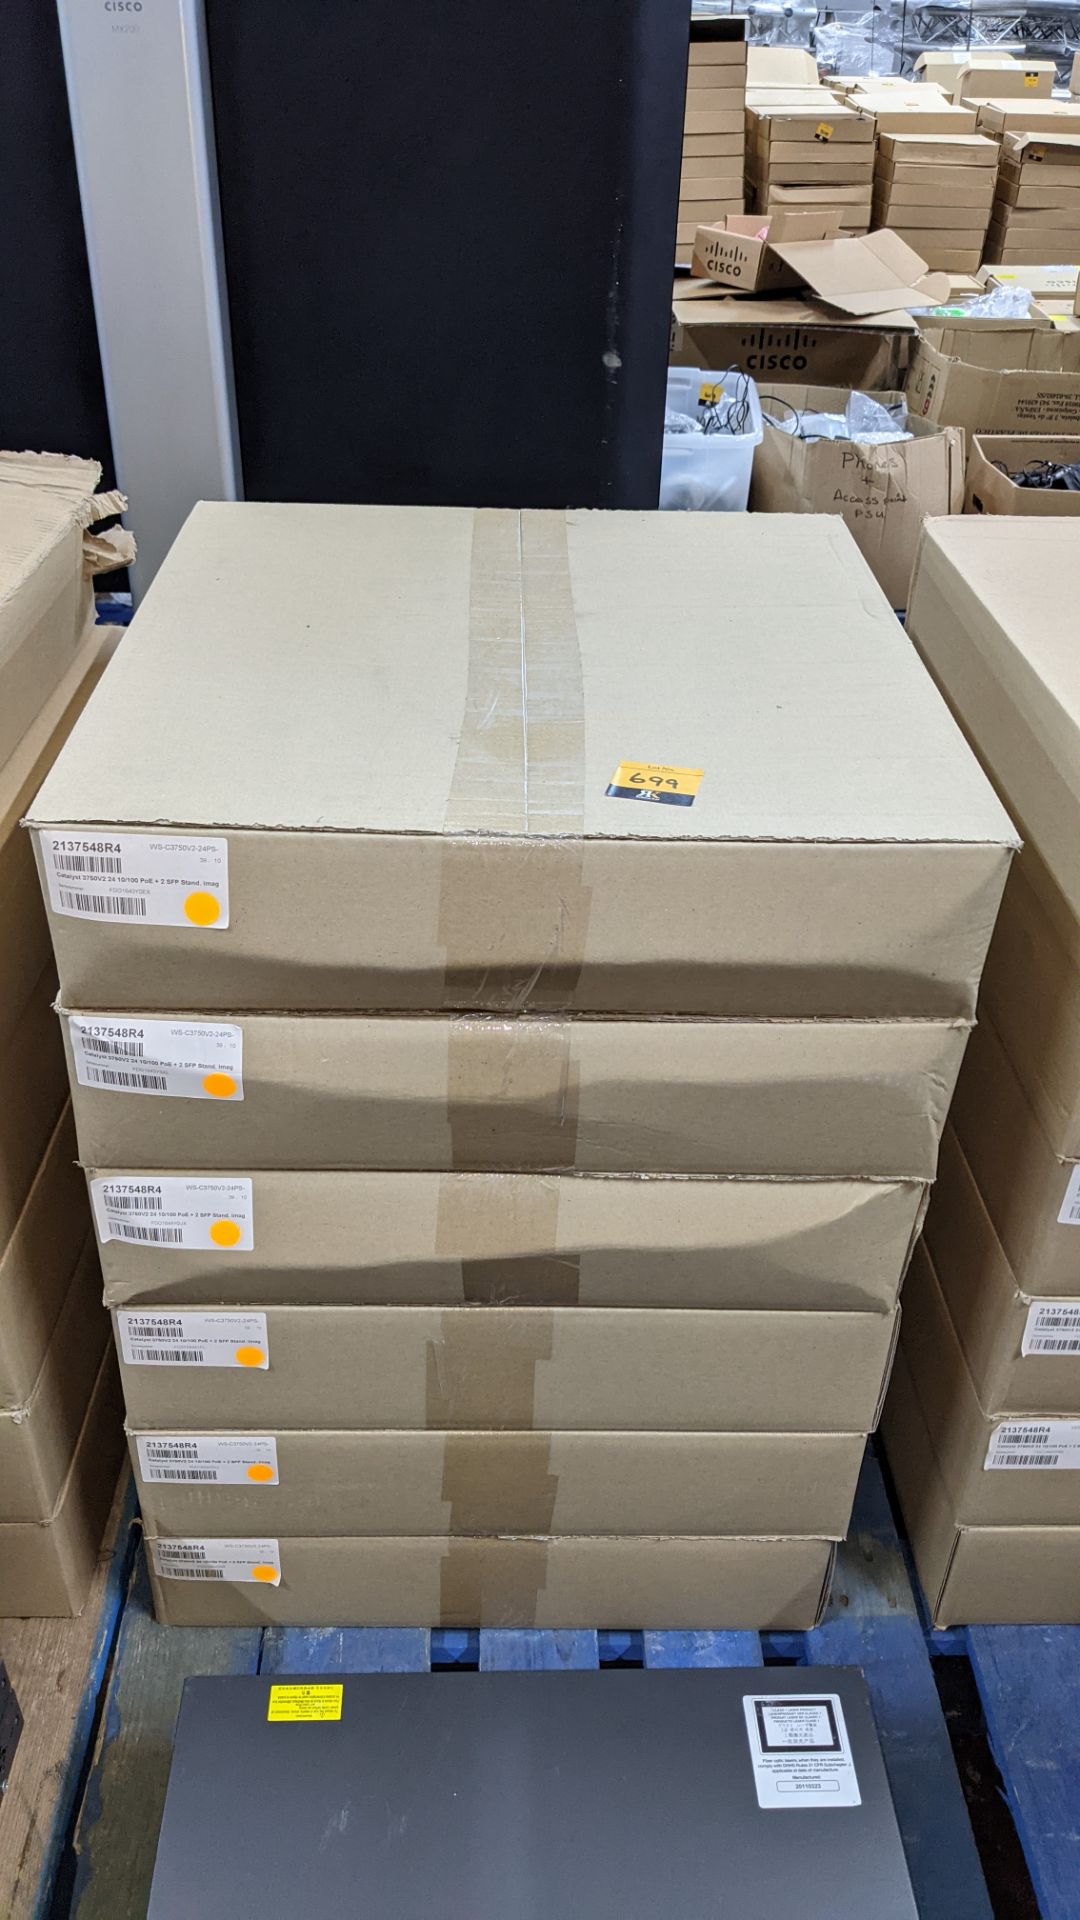 6 off Cisco 3750 V2 managed switches - we assume these are refurbished as each unit is wrapped in pl - Image 2 of 5